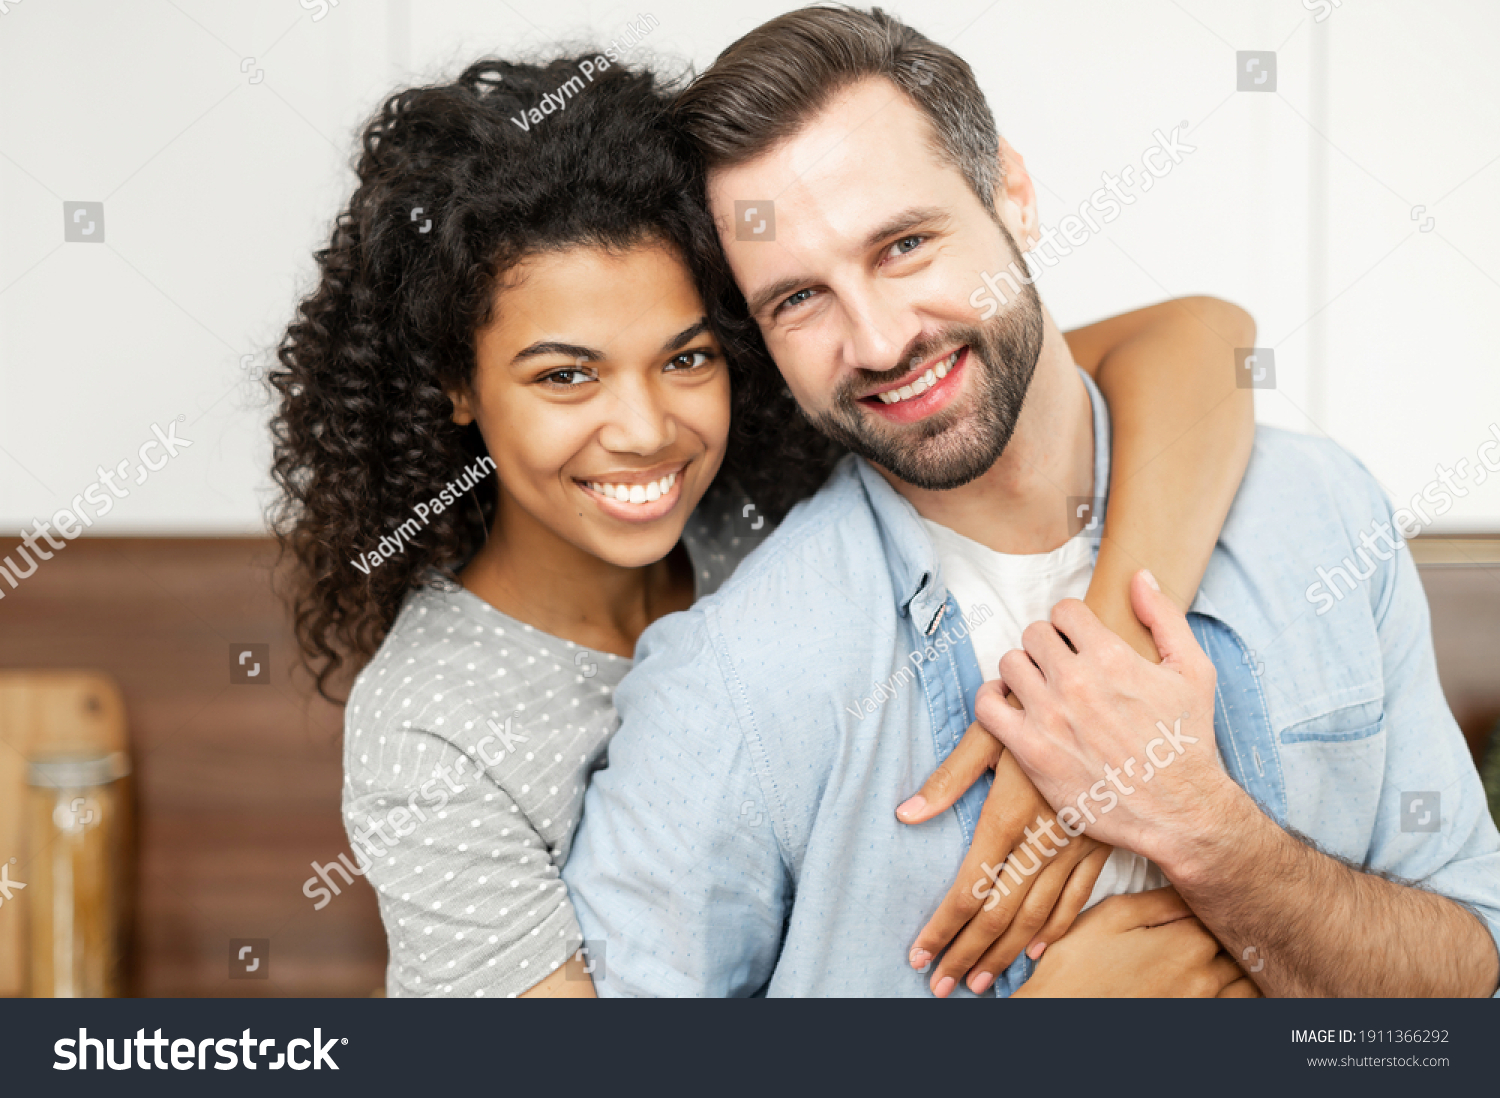 Close-up portrait of happy multi-ethnic couple in love. An African woman hugs a caucasian guy from behind, they looks at the camera with a cheerful smiles #1911366292